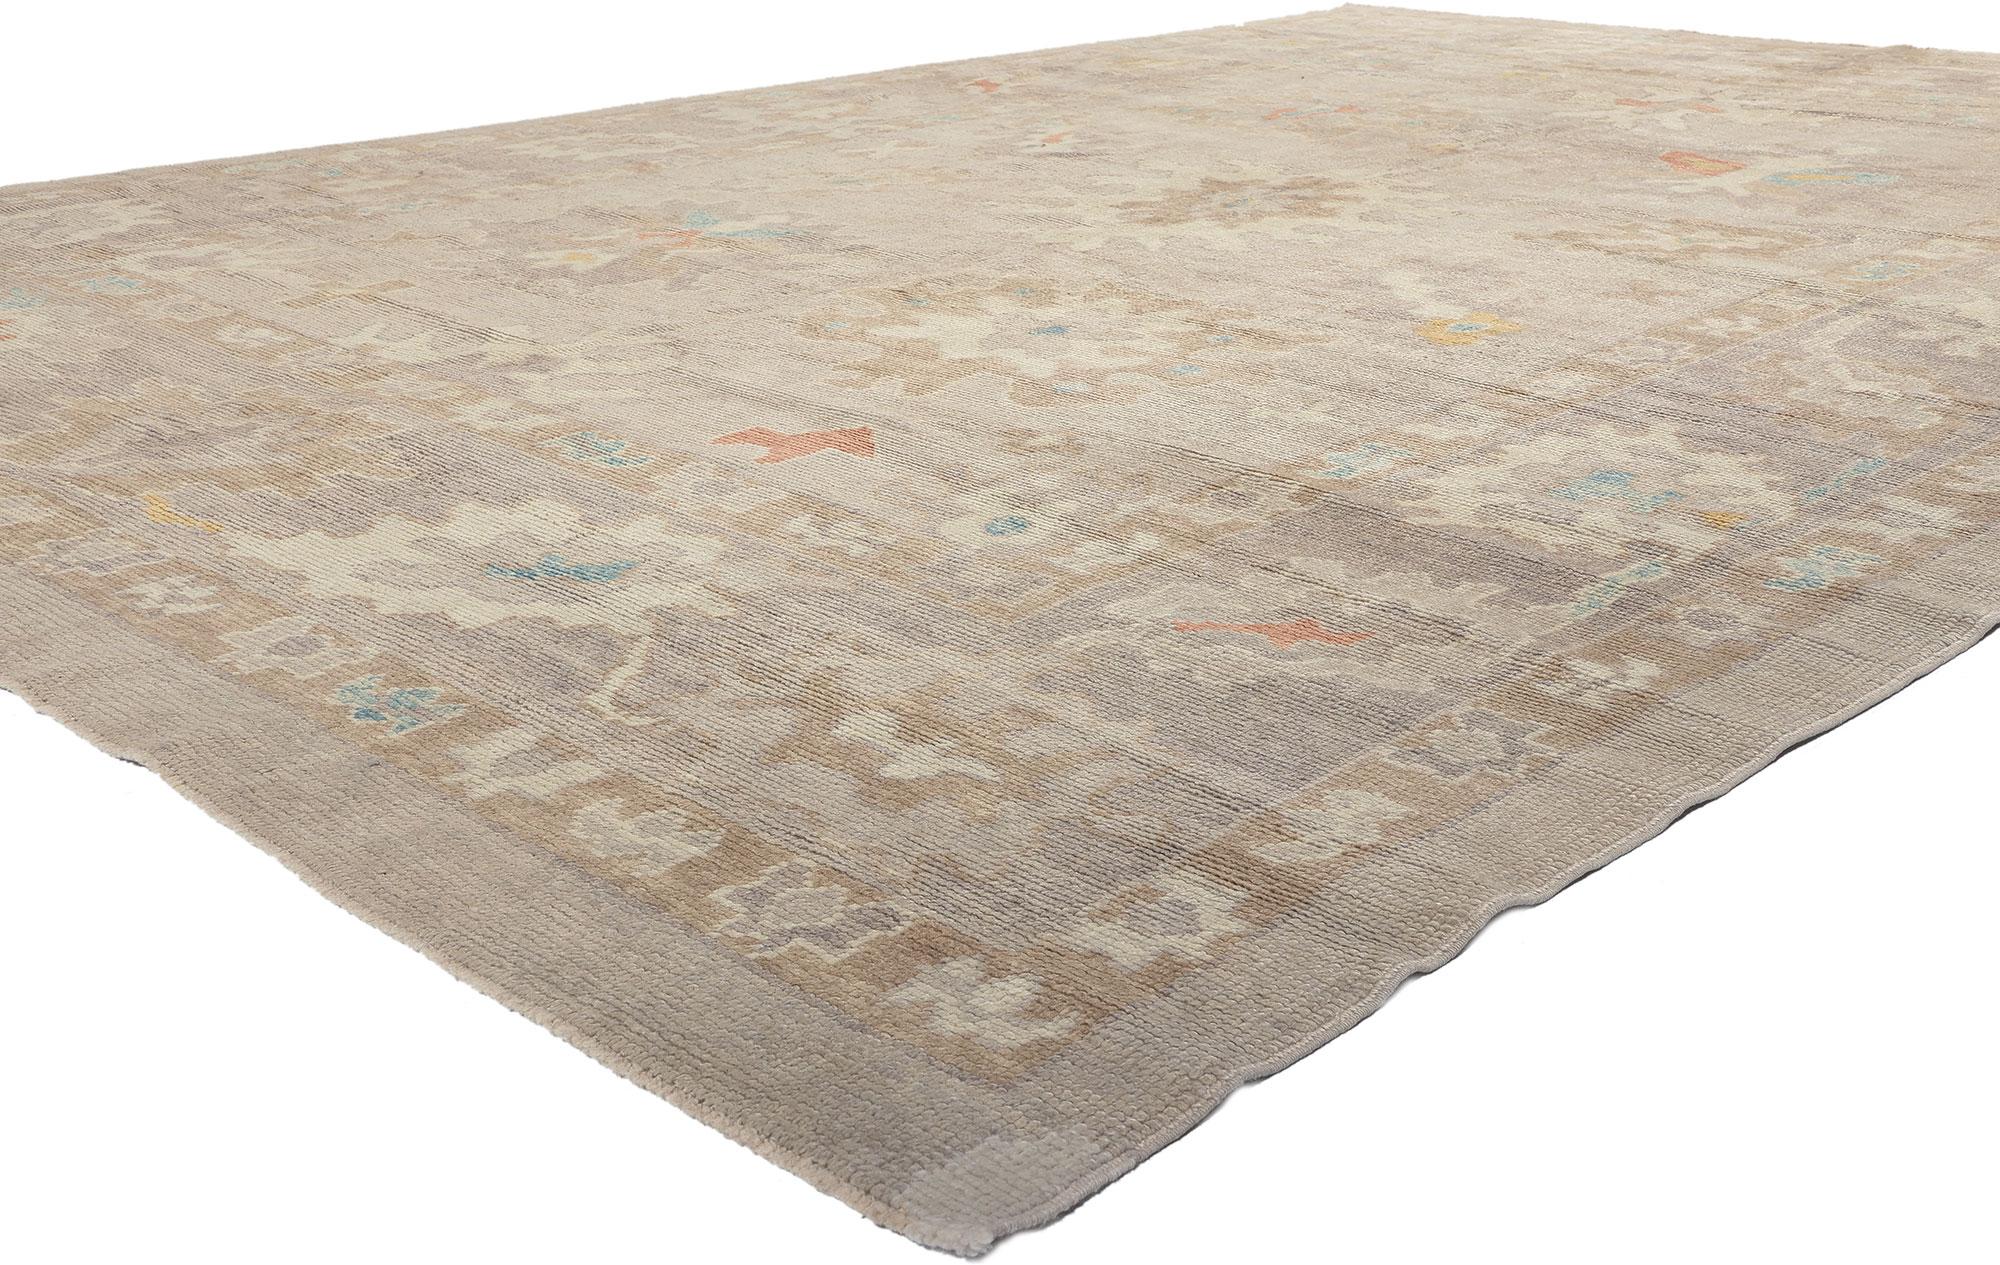 52376 Modern Oushak Turkish Rug, 08'11 x 12'05. Indulge in the essence of Shibui and Biophilic Design as you welcome the allure of this hand-knotted wool modern Turkish Oushak rug into your space. Subdued ornamentation weaves a captivating vision of